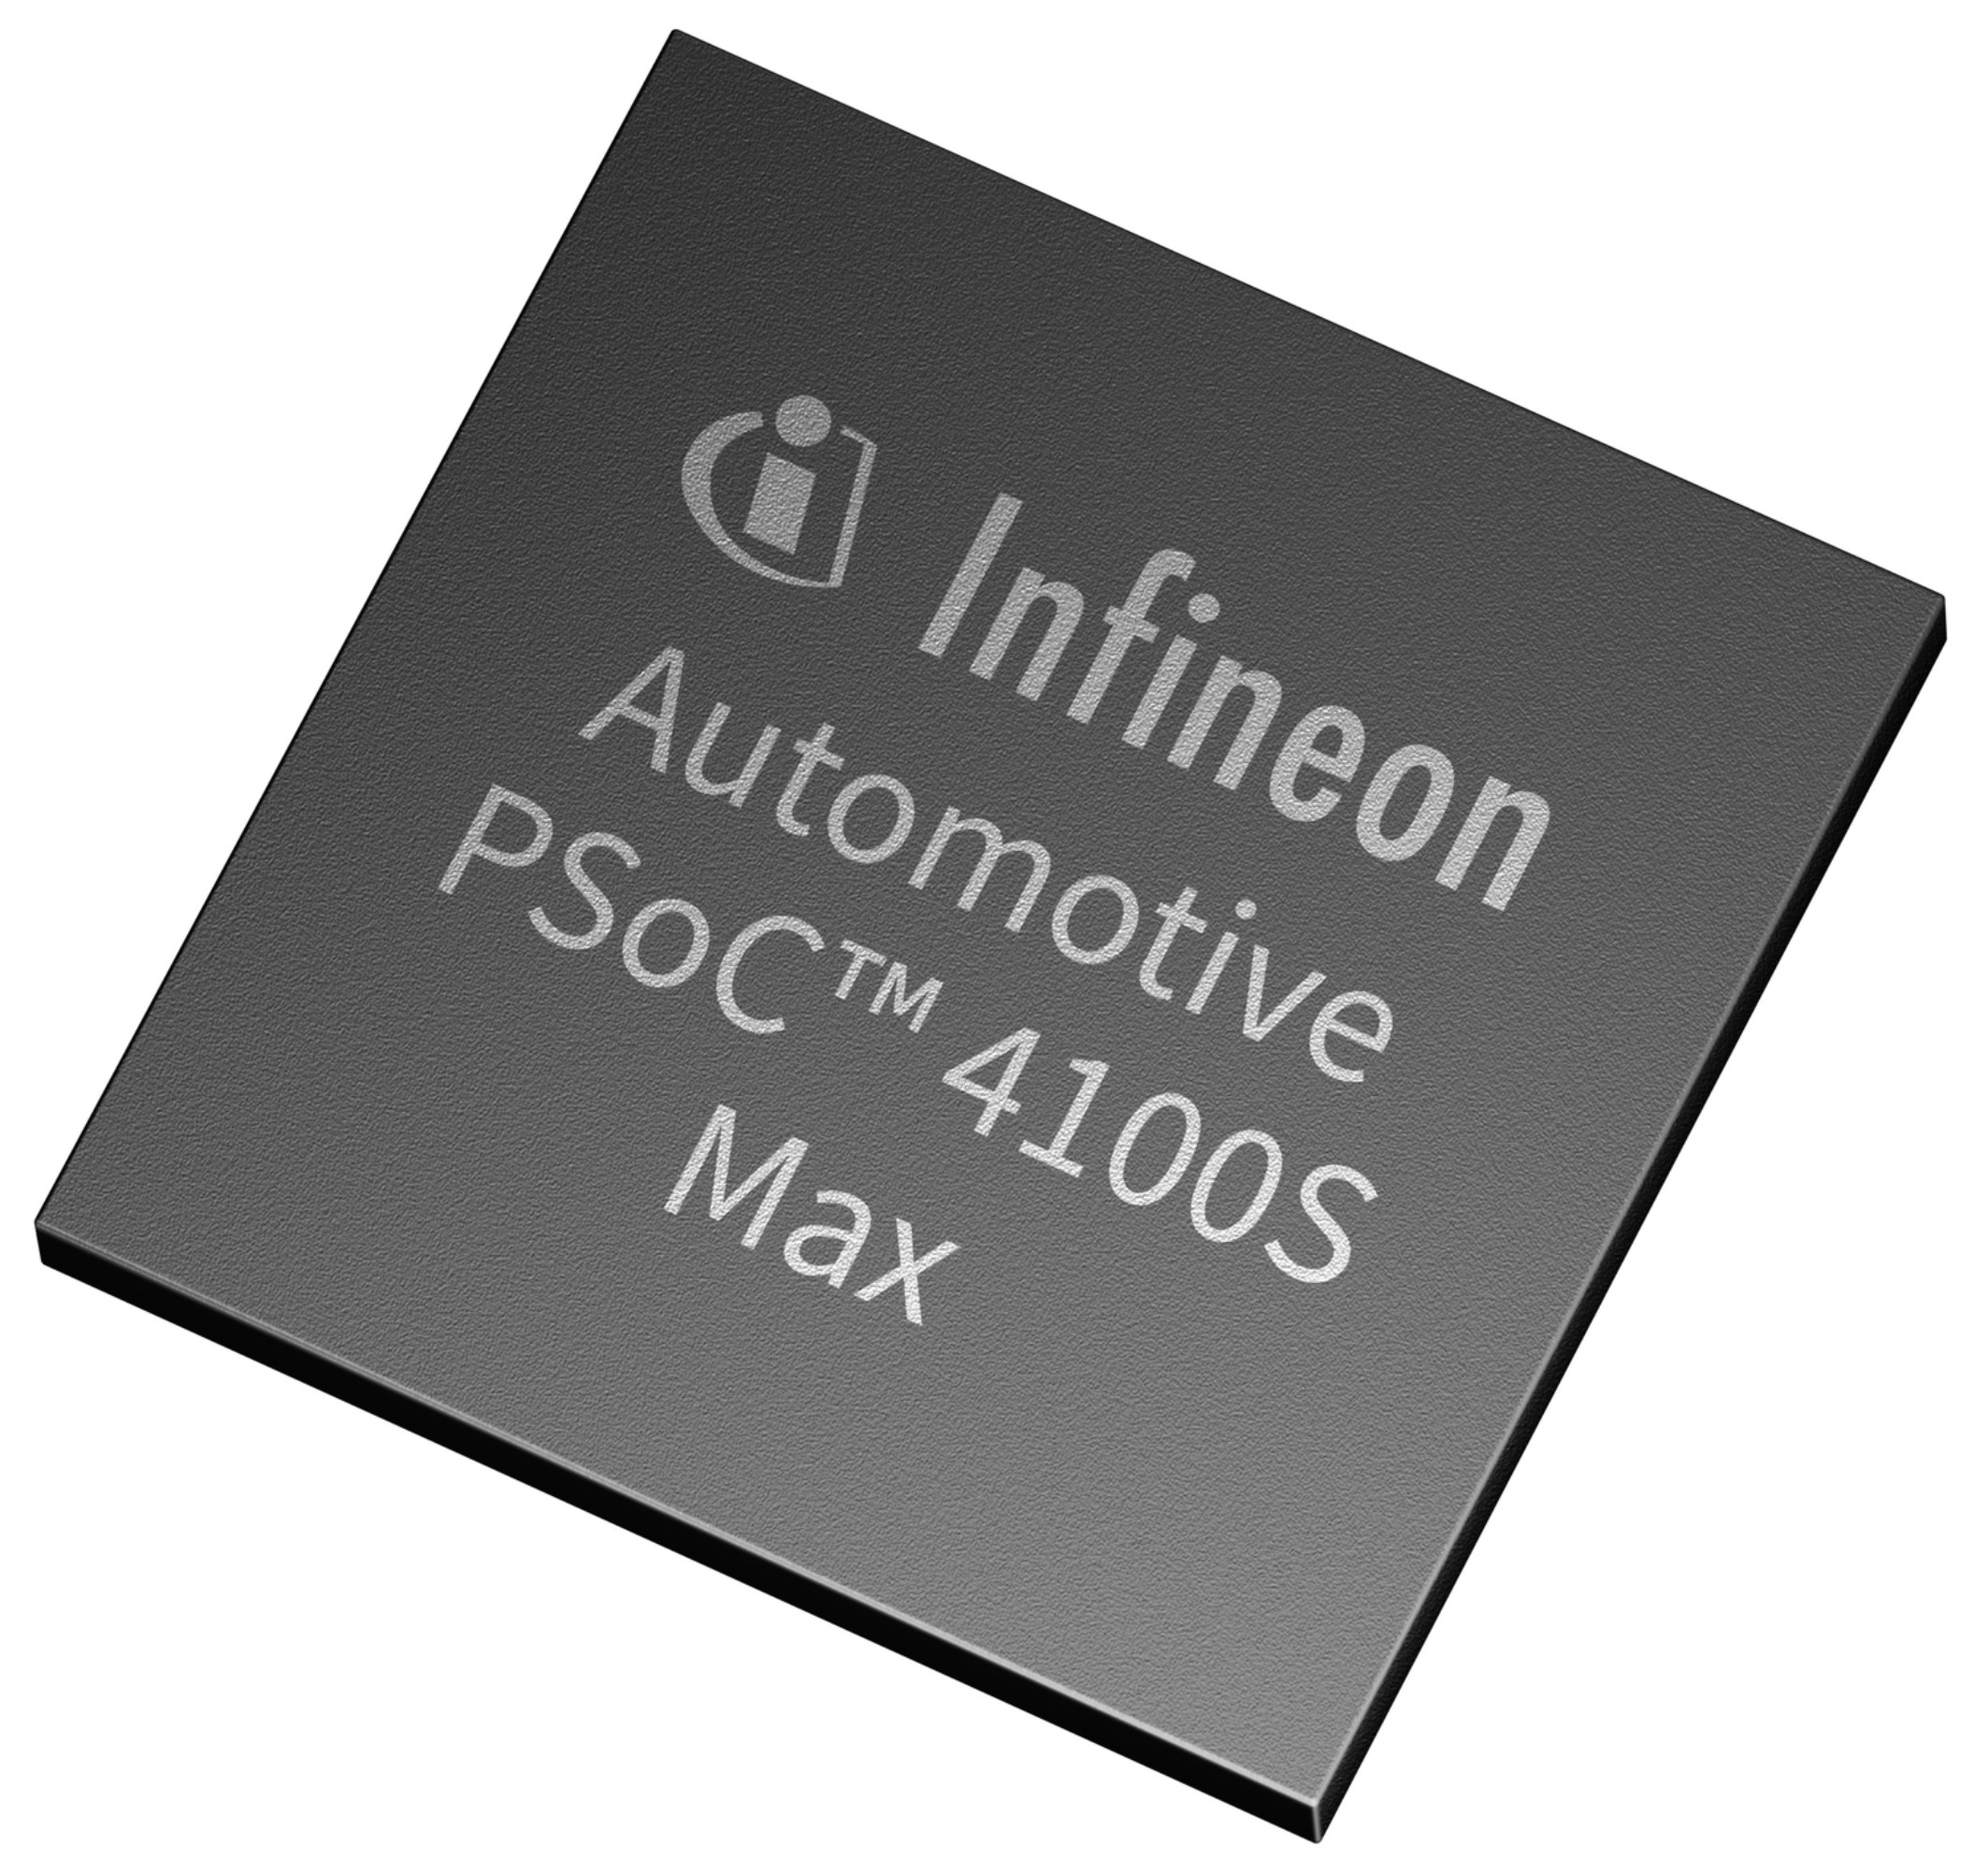 PSoC Automotive 4100S Max Supports Fifth-Generation CAPSENSE Technology with Higher Performance